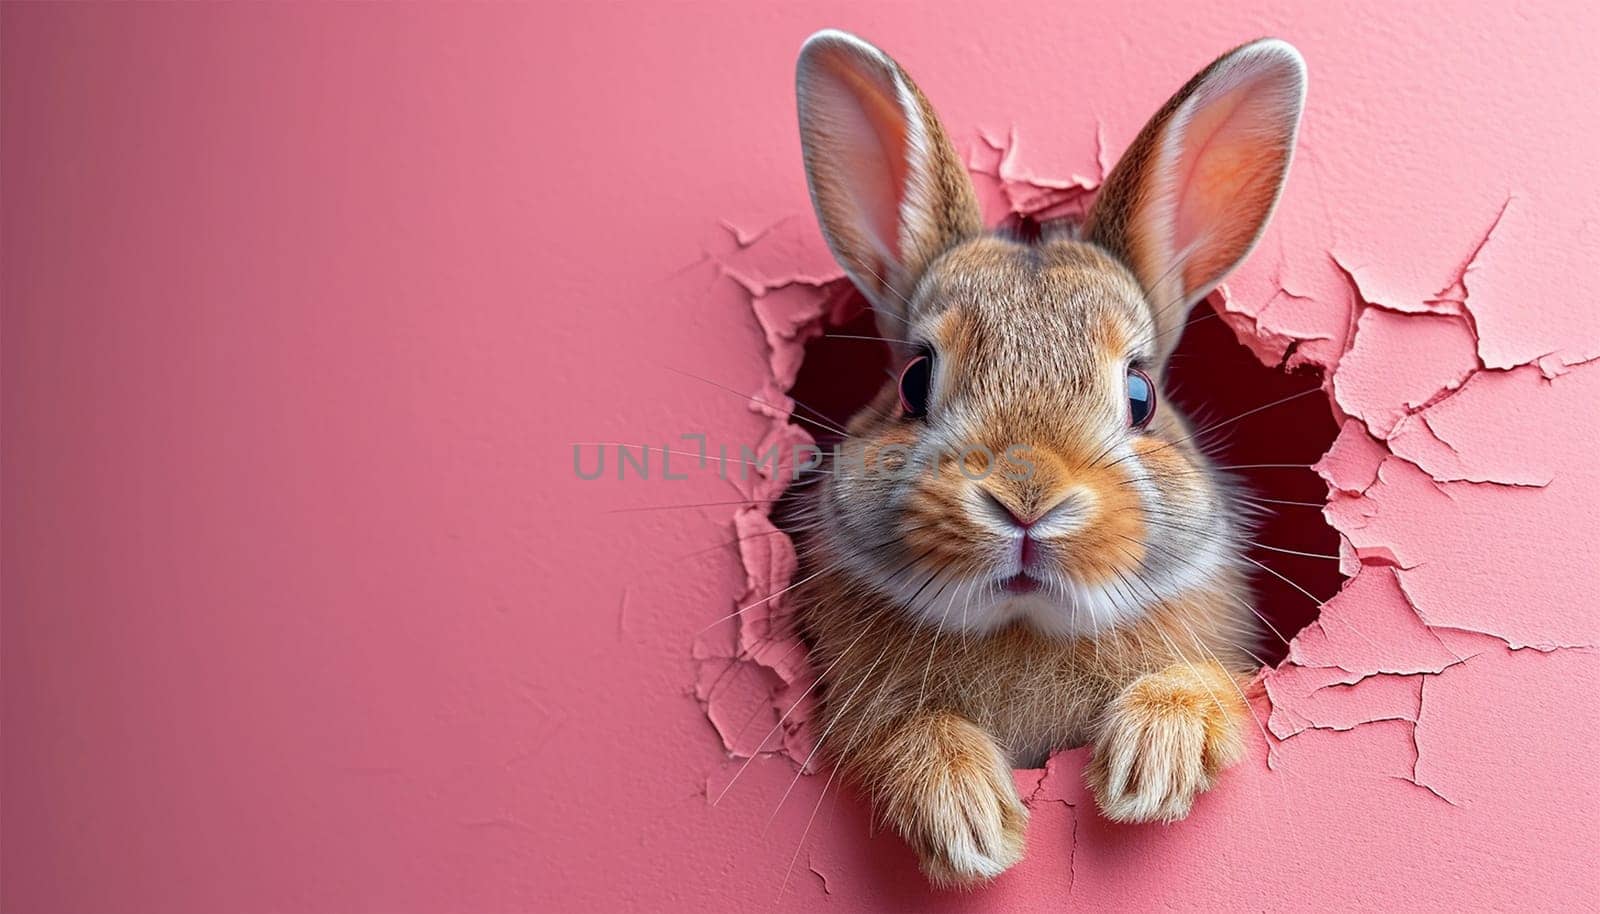 Cartoon cute bunny looking out of a cut hole bright pink background. illustration. Spring holiday and Easter background. Copy space Happy Easter funny